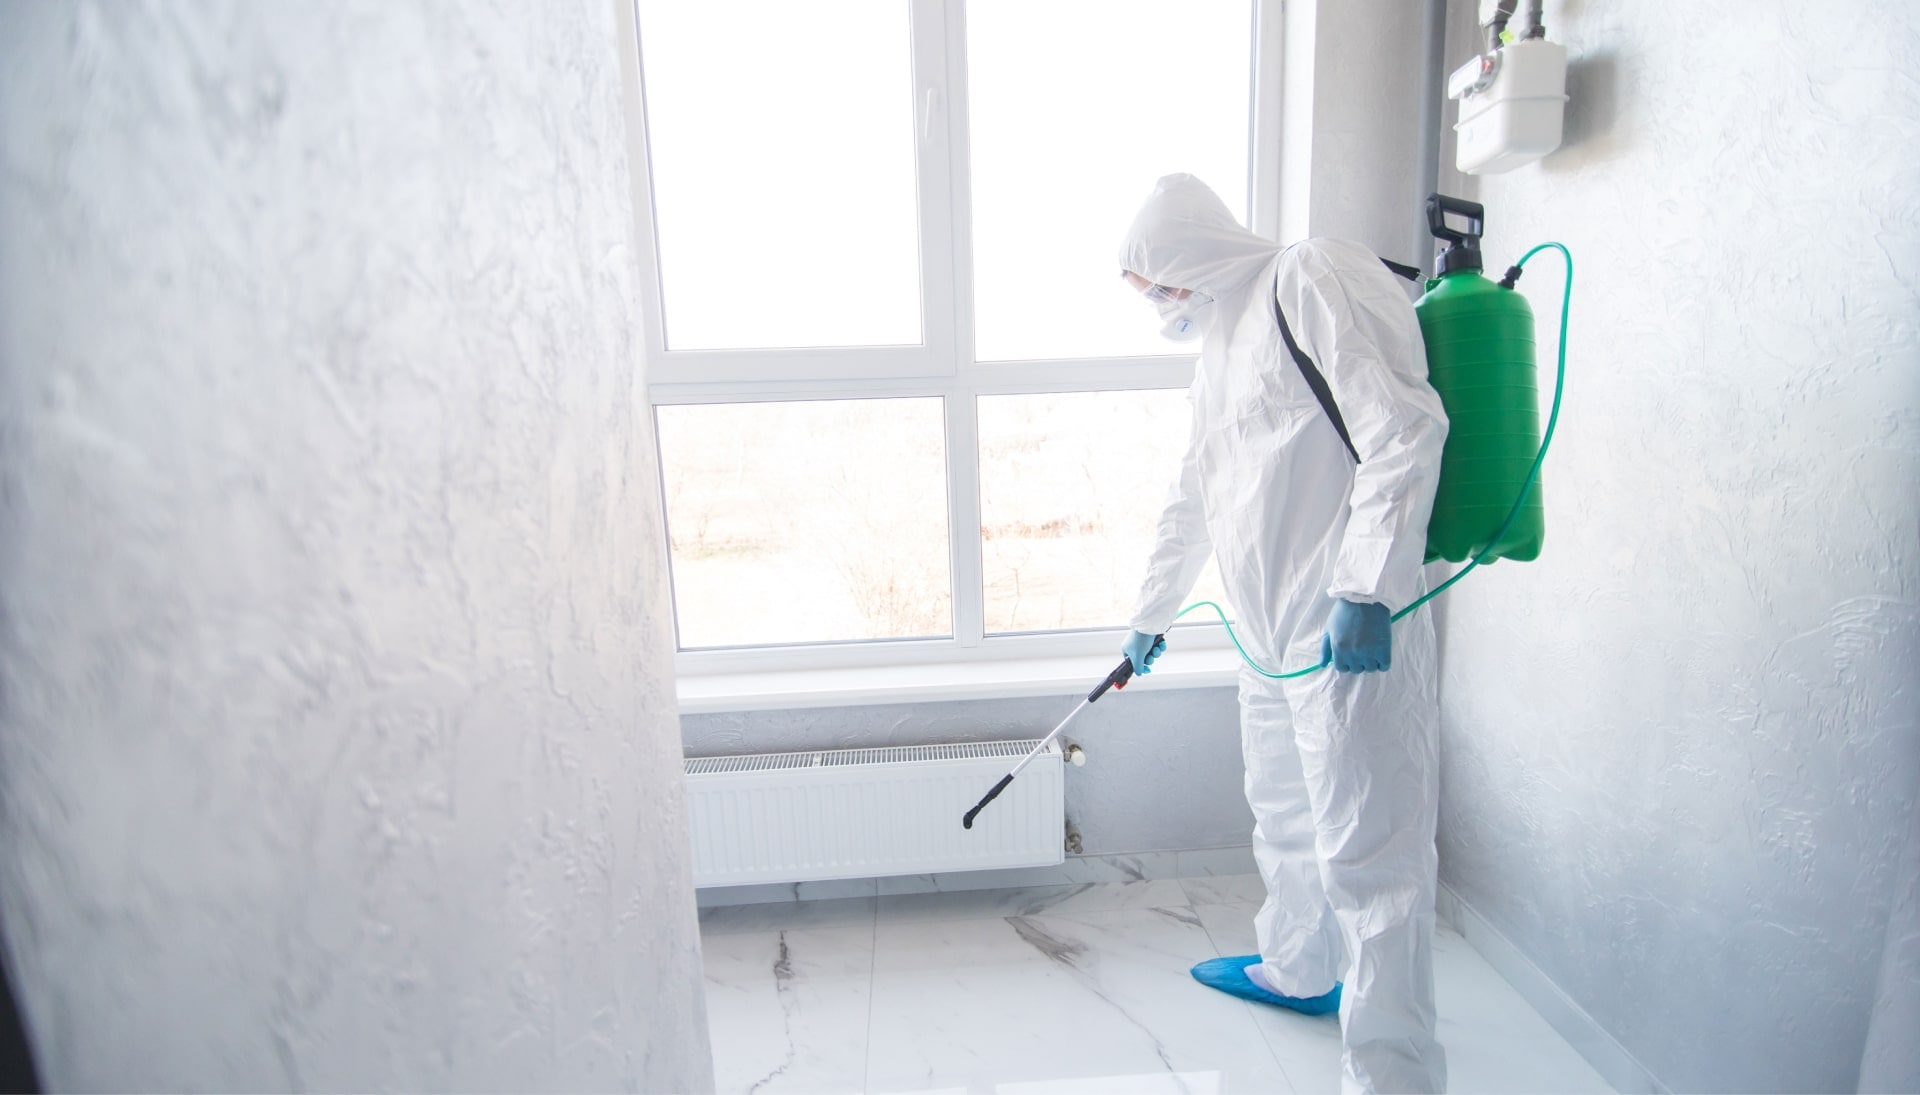 We provide the highest-quality mold inspection, testing, and removal services in the Wilmington, North Carolina area.